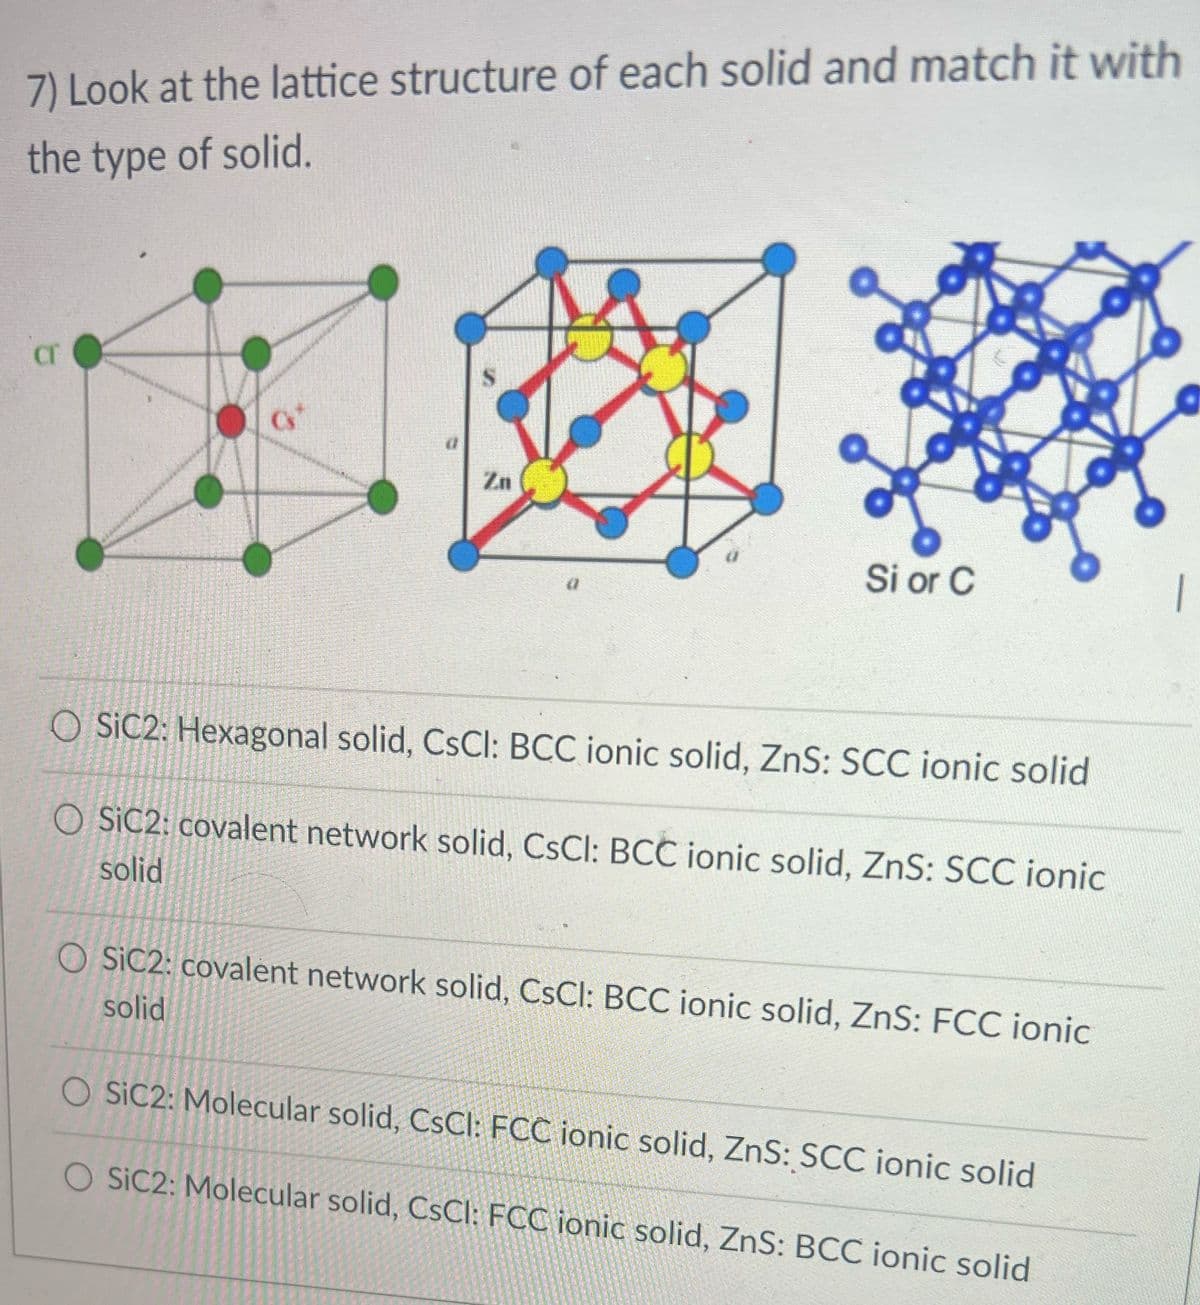 7) Look at the lattice structure of each solid and match it with
the type of solid.
Cr
Zn
Si or C
O SIC2: Hexagonal solid, CsCl: BCC ionic solid, ZnS: SCC ionic solid
O SIC2: covalent network solid, CsCl: BCC ionic solid, ZnS: SCC ionic
solid
O SIC2: covalent network solid, CsCl: BCC ionic solid, ZnS: FCC ionic
solid
O SIC2: Molecular solid, CsCl: FCC ionic solid, ZnS: SCC ionic solid
O SIC2: Molecular solid, CsCl: FCC ionic solid, ZnS: BCC ionic solid